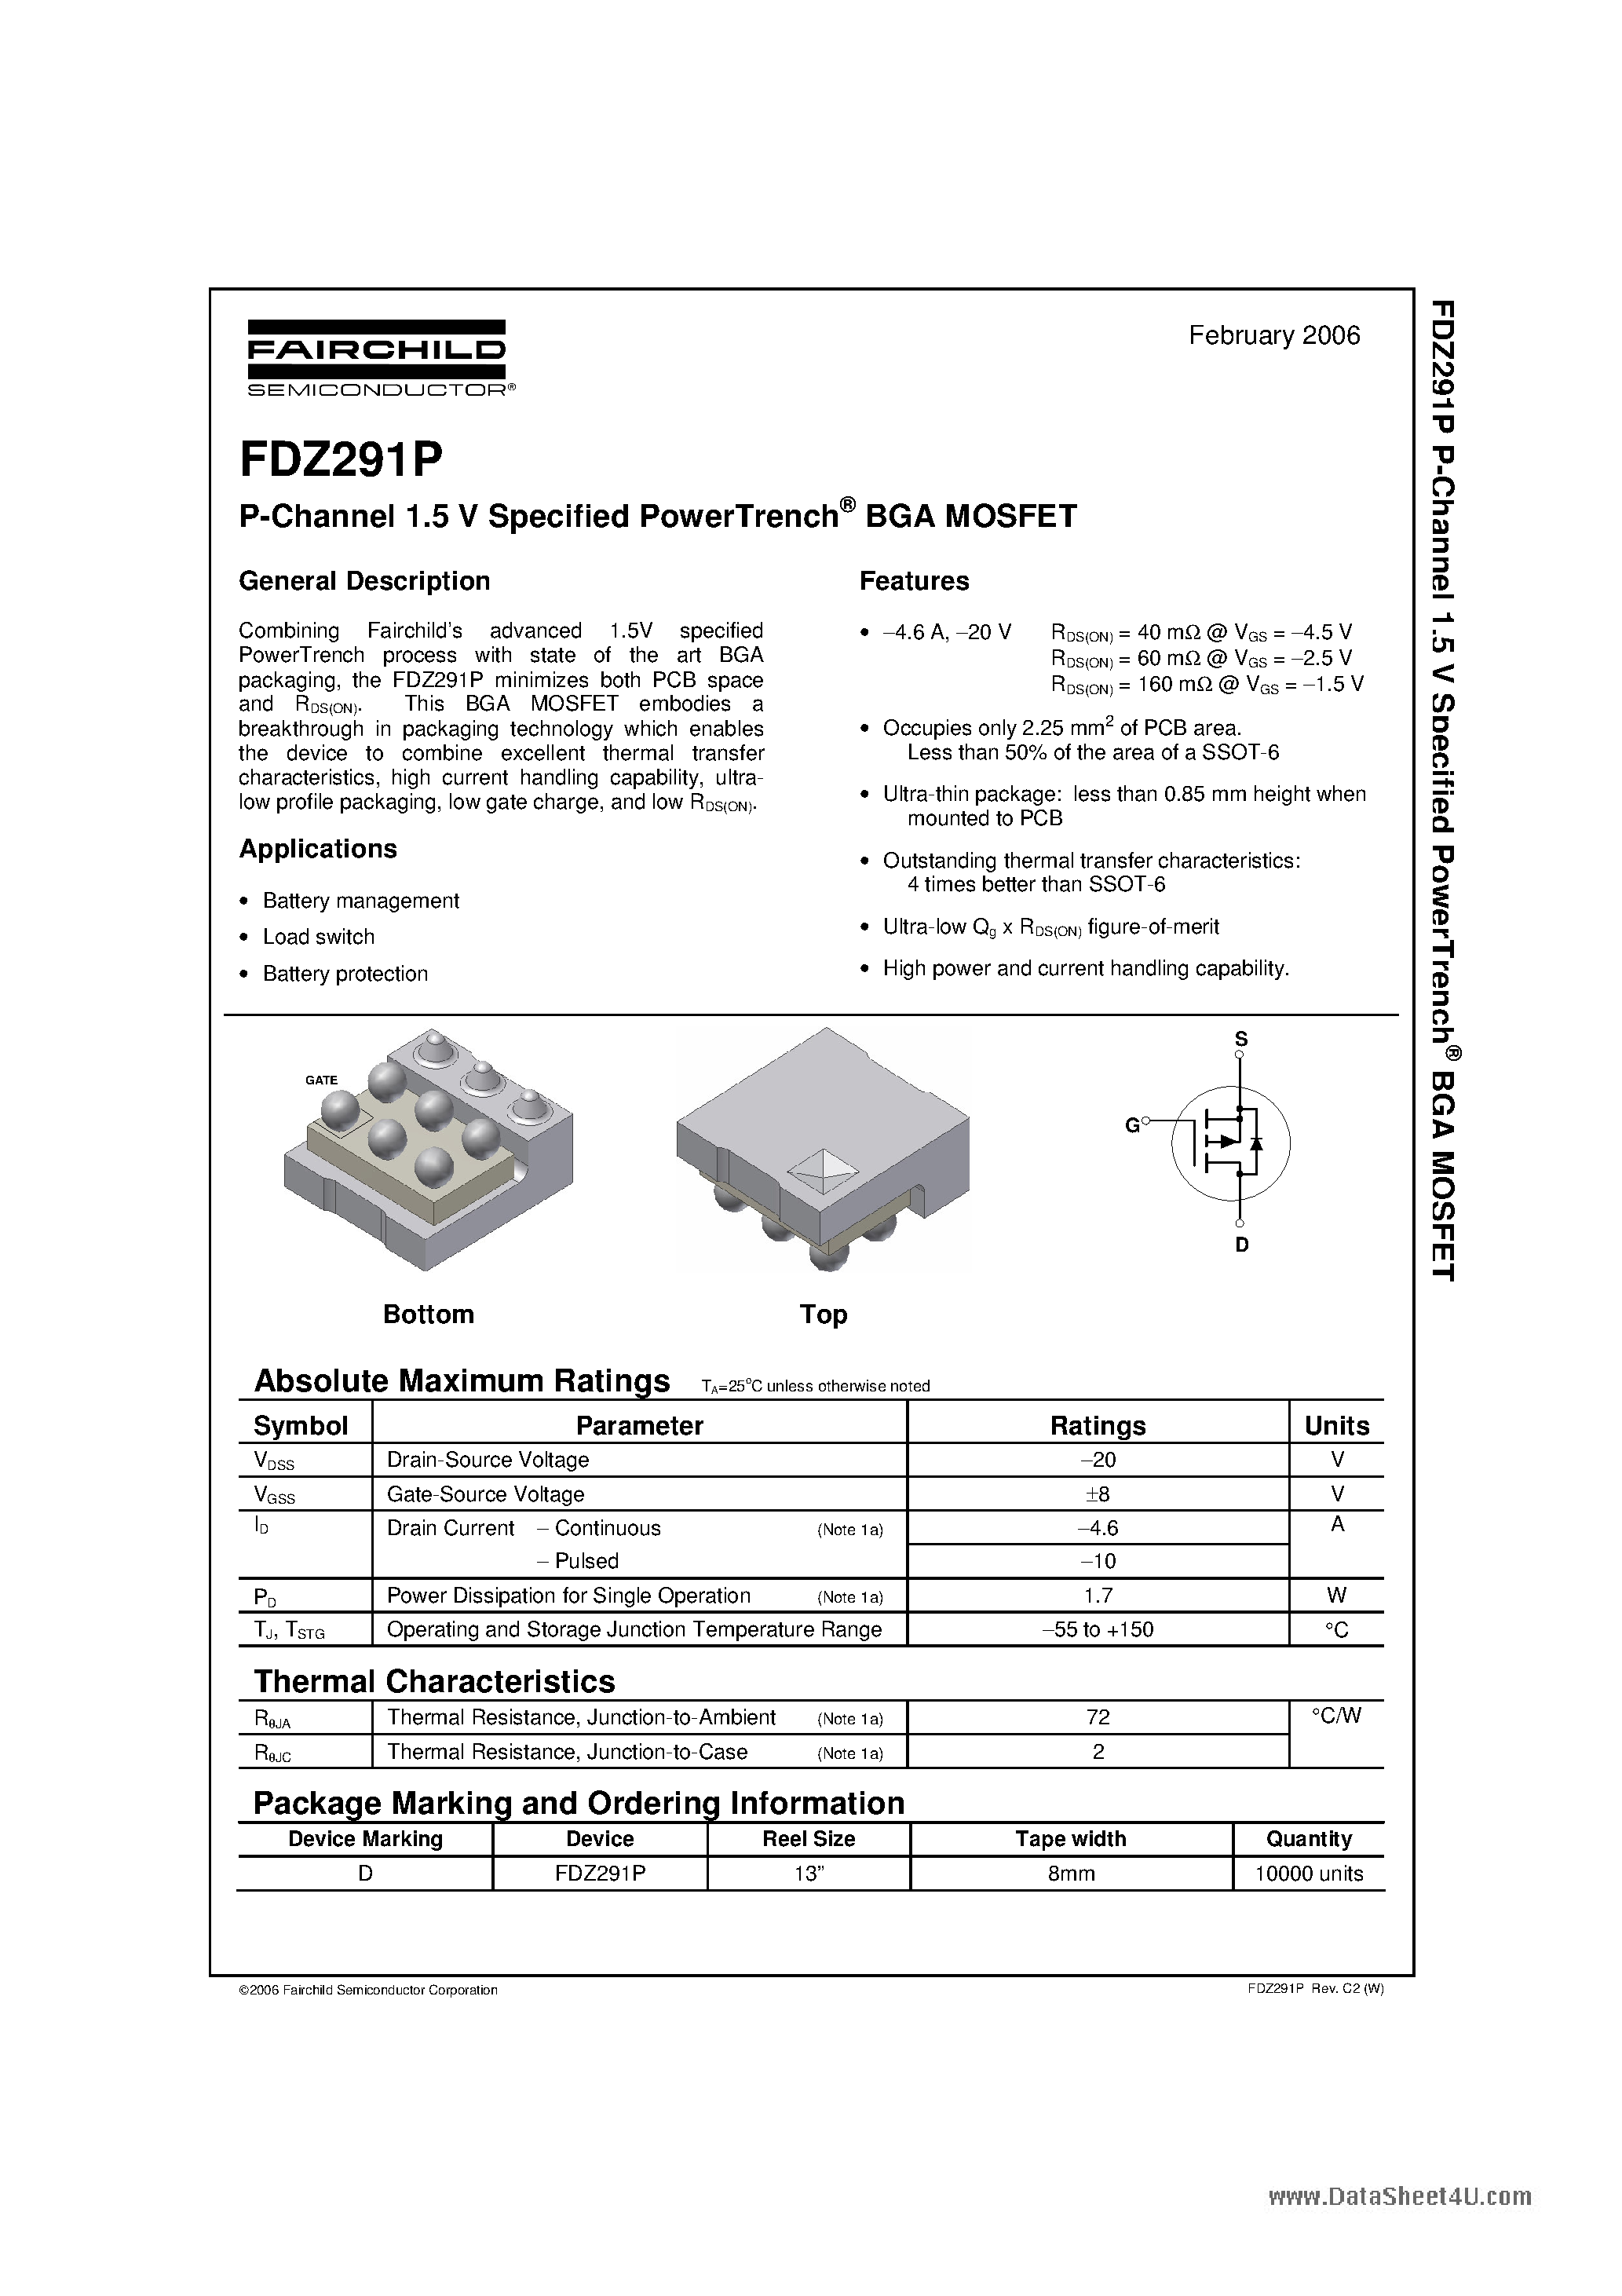 Даташит FDZ291P - P-Channel 1.5 V Specified PowerTrench BGA MOSFET страница 1